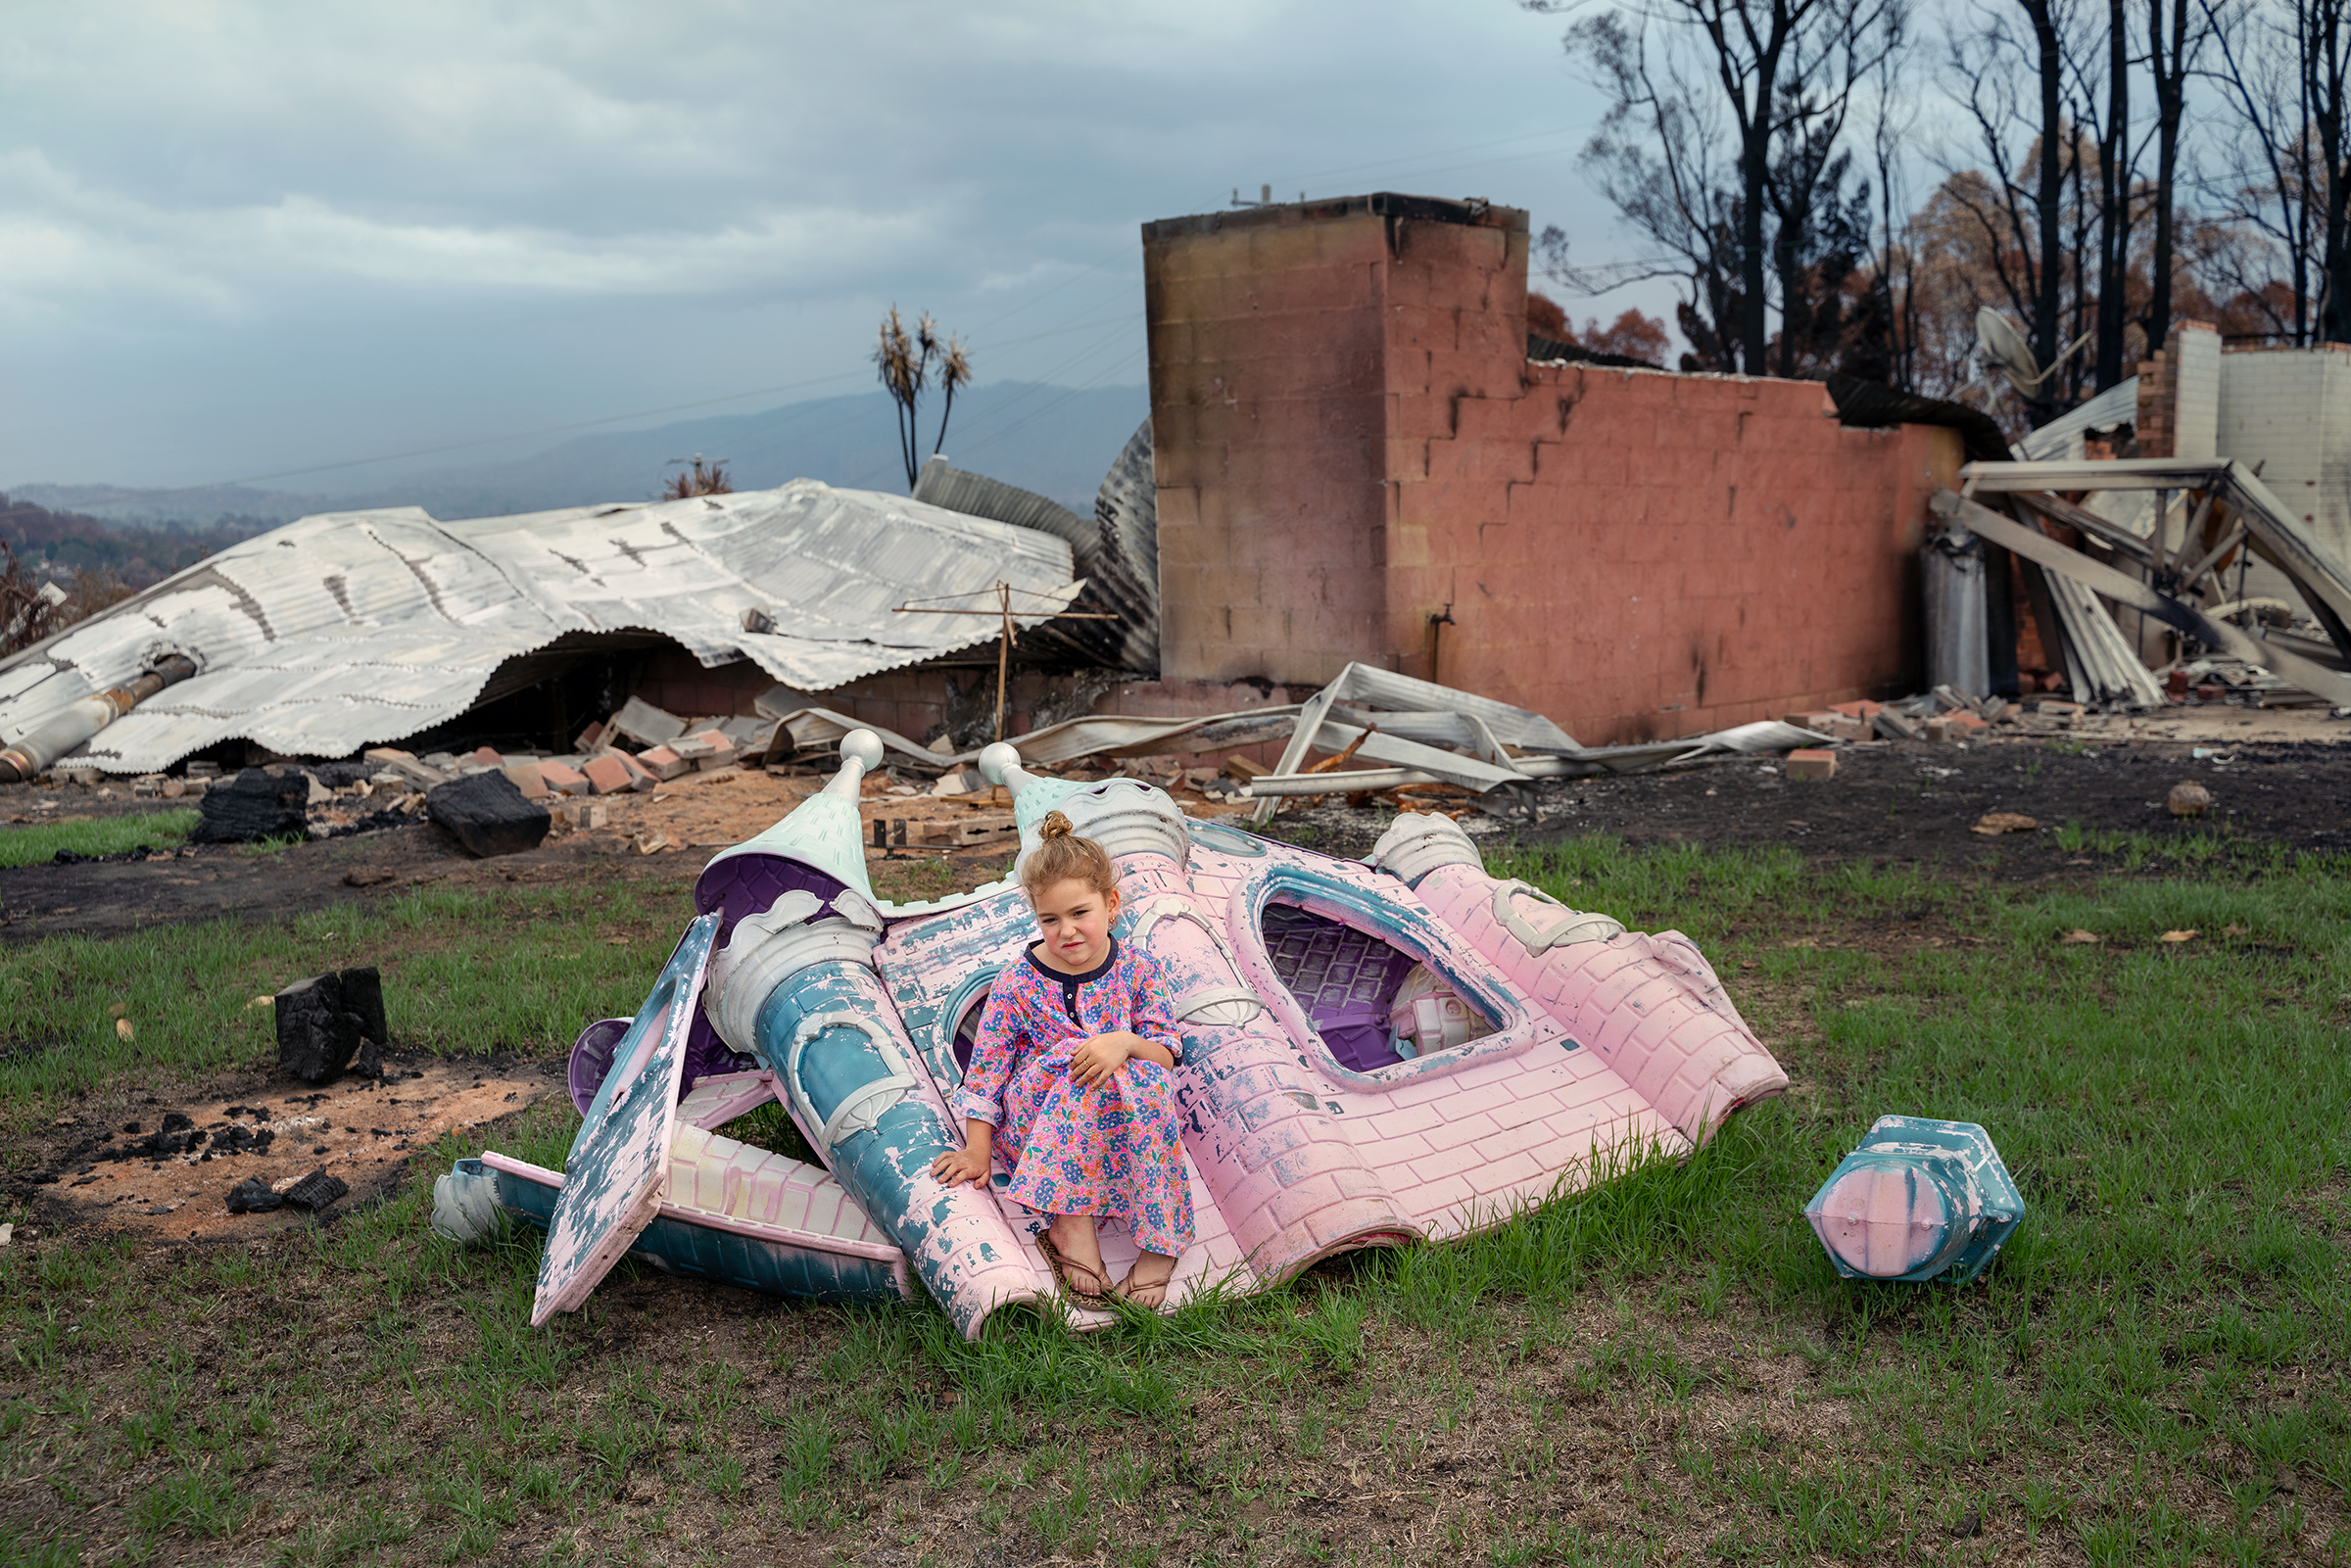 <strong>Sarah Rugendyke</strong>, 7, sits on a play castle that was burned on her family’s property in Cobargo on Jan. 20; an out-of-control bushfire devastated the tourist town about 240 miles south of Sydney on New Year’s Eve. "<a href="https://time.com/longform/australia-wildfires-bush-pictures/">Forgotten Country</a>," Feb. 3 issue. (Adam Ferguson for TIME)